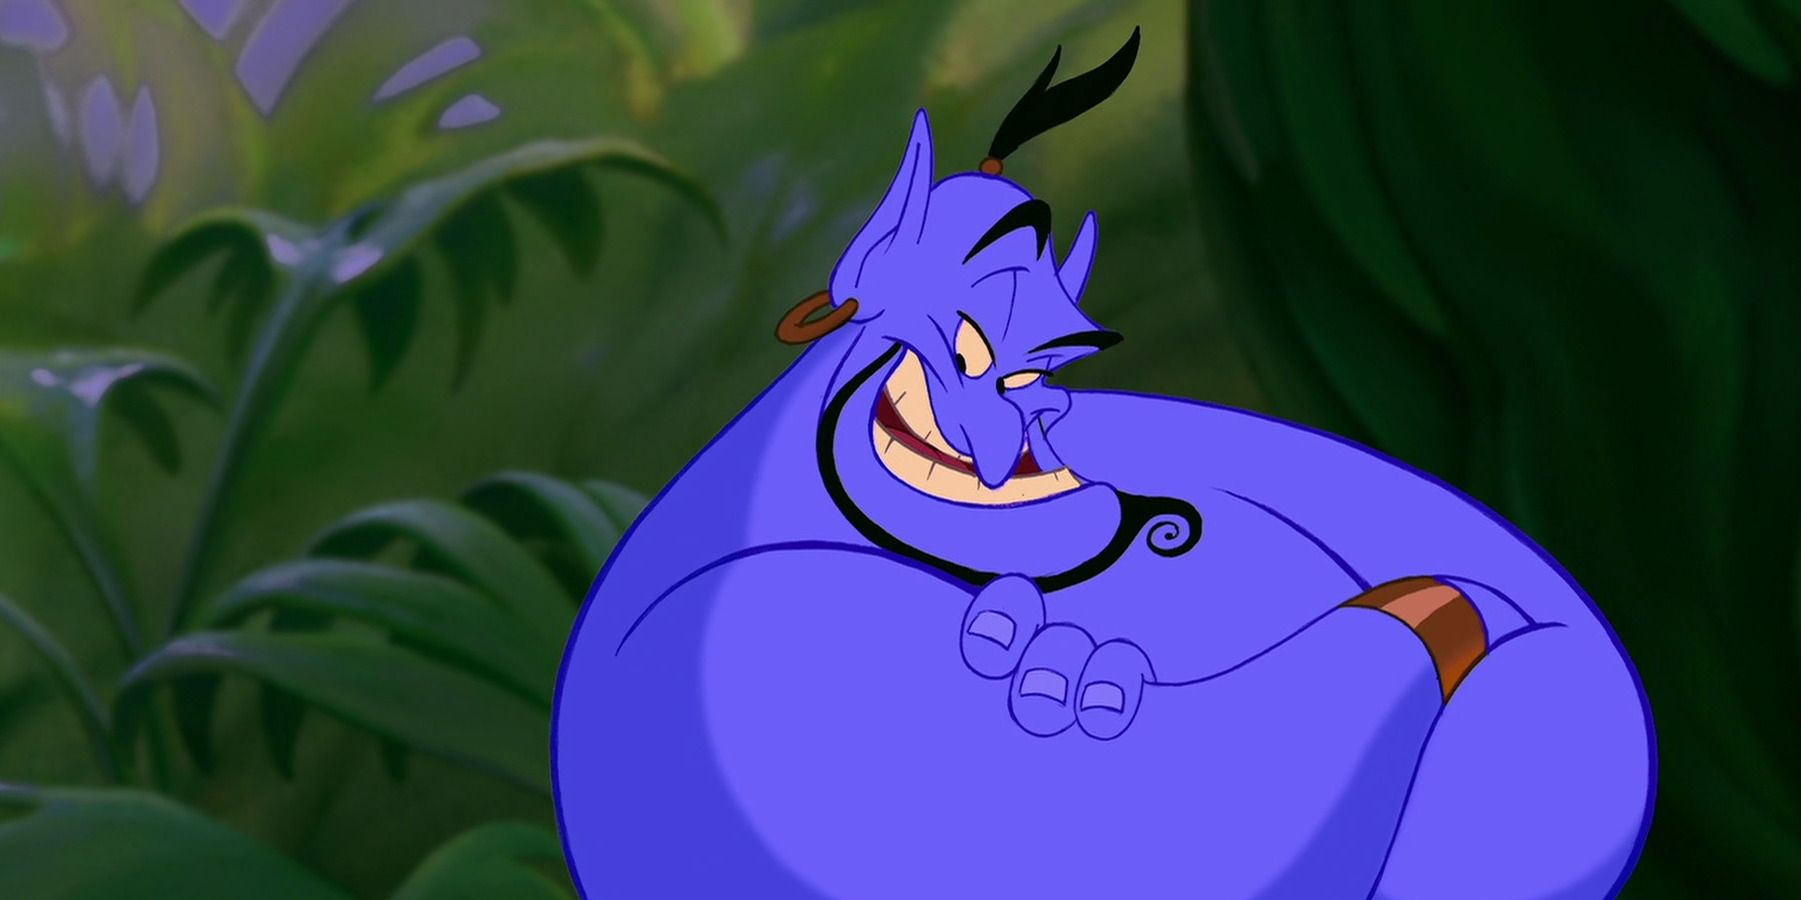 10 Of Robin Williams’s Funniest Characters Ranked